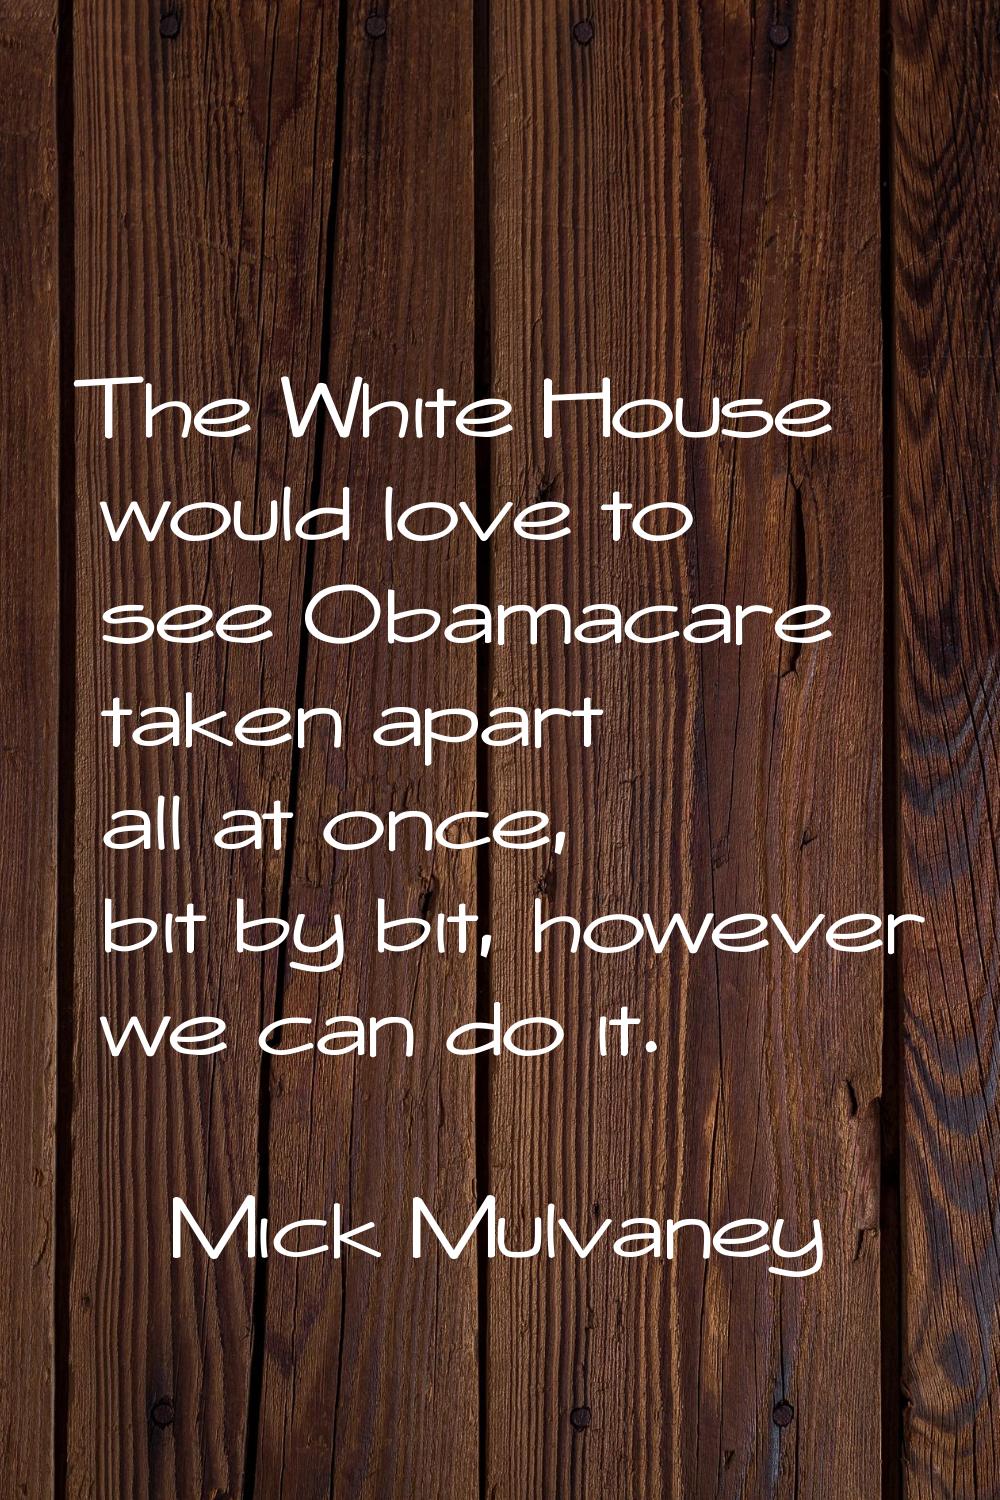 The White House would love to see Obamacare taken apart all at once, bit by bit, however we can do 